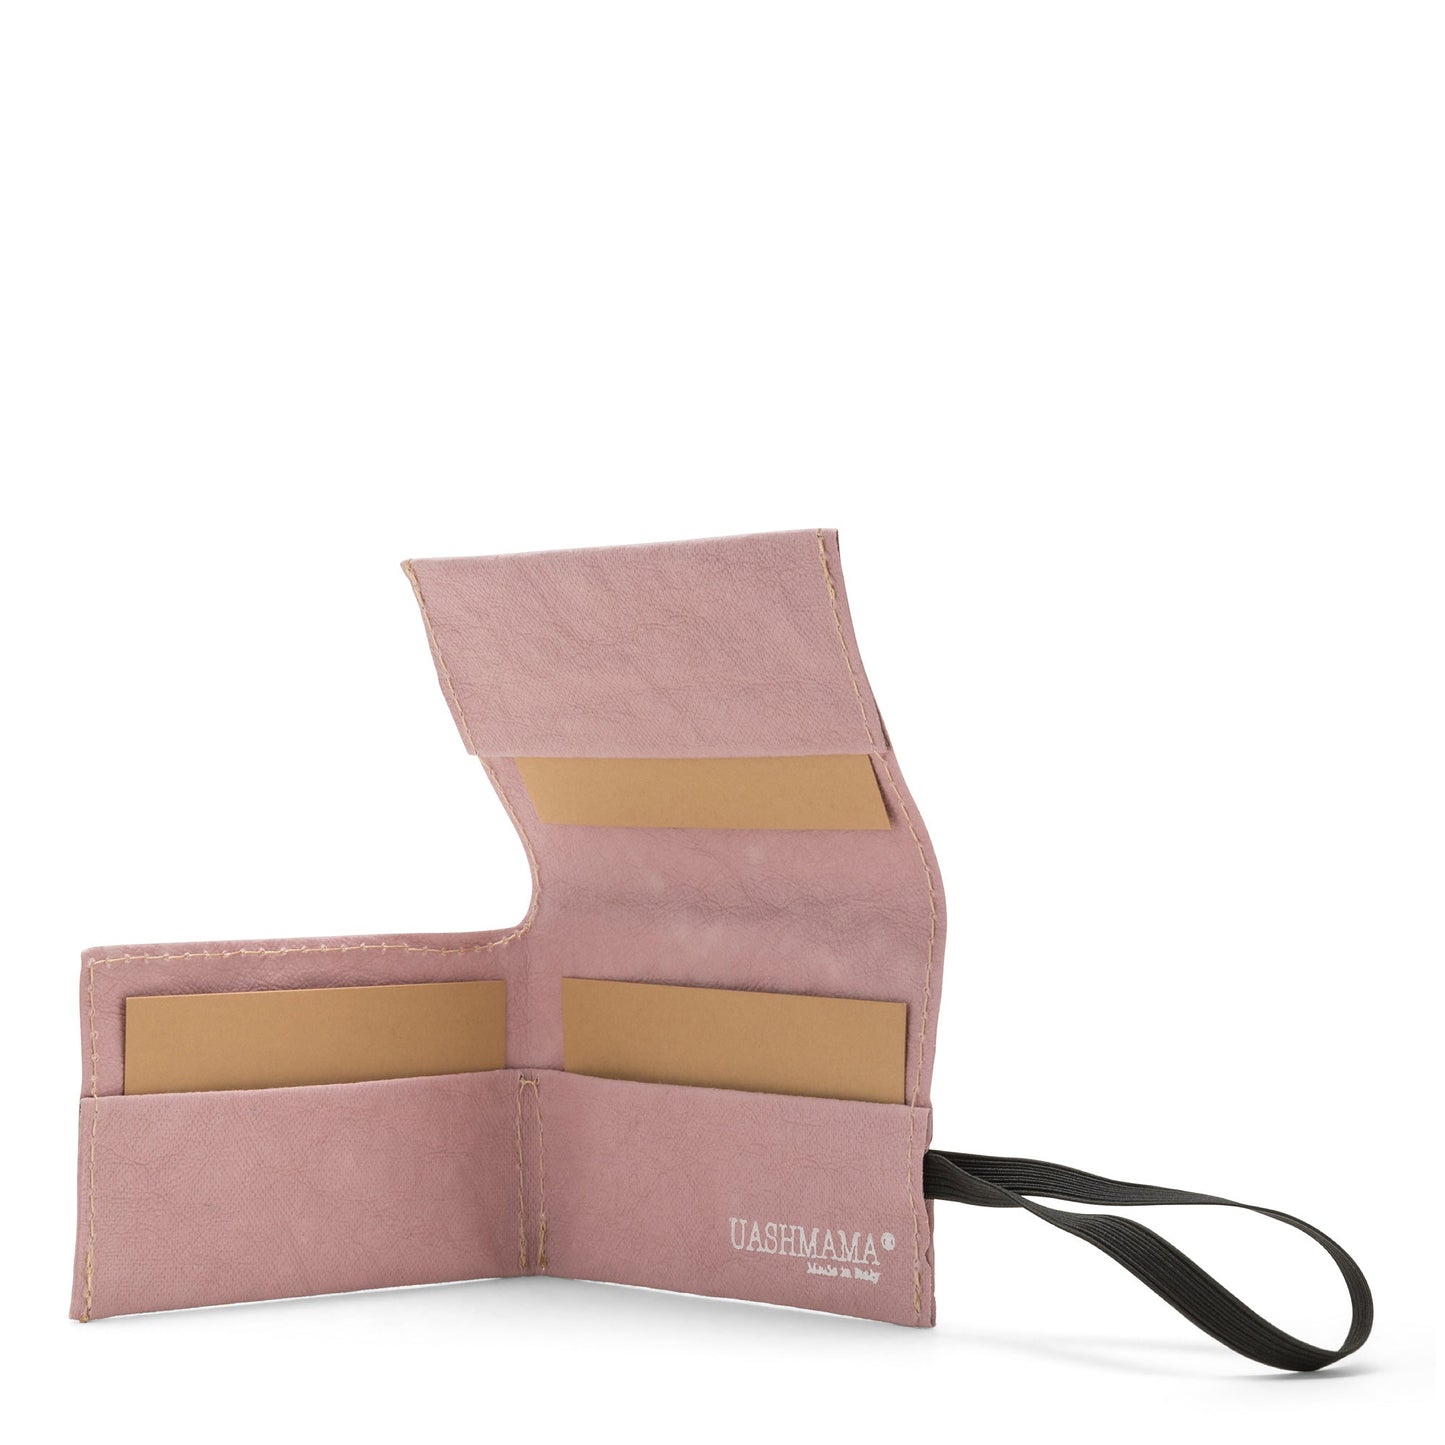 A dusky pink washable paper card holder is shown open from the front angle. It features a black elastic side strap and the white UASHMAMA logo stamped on the inside bottom right.